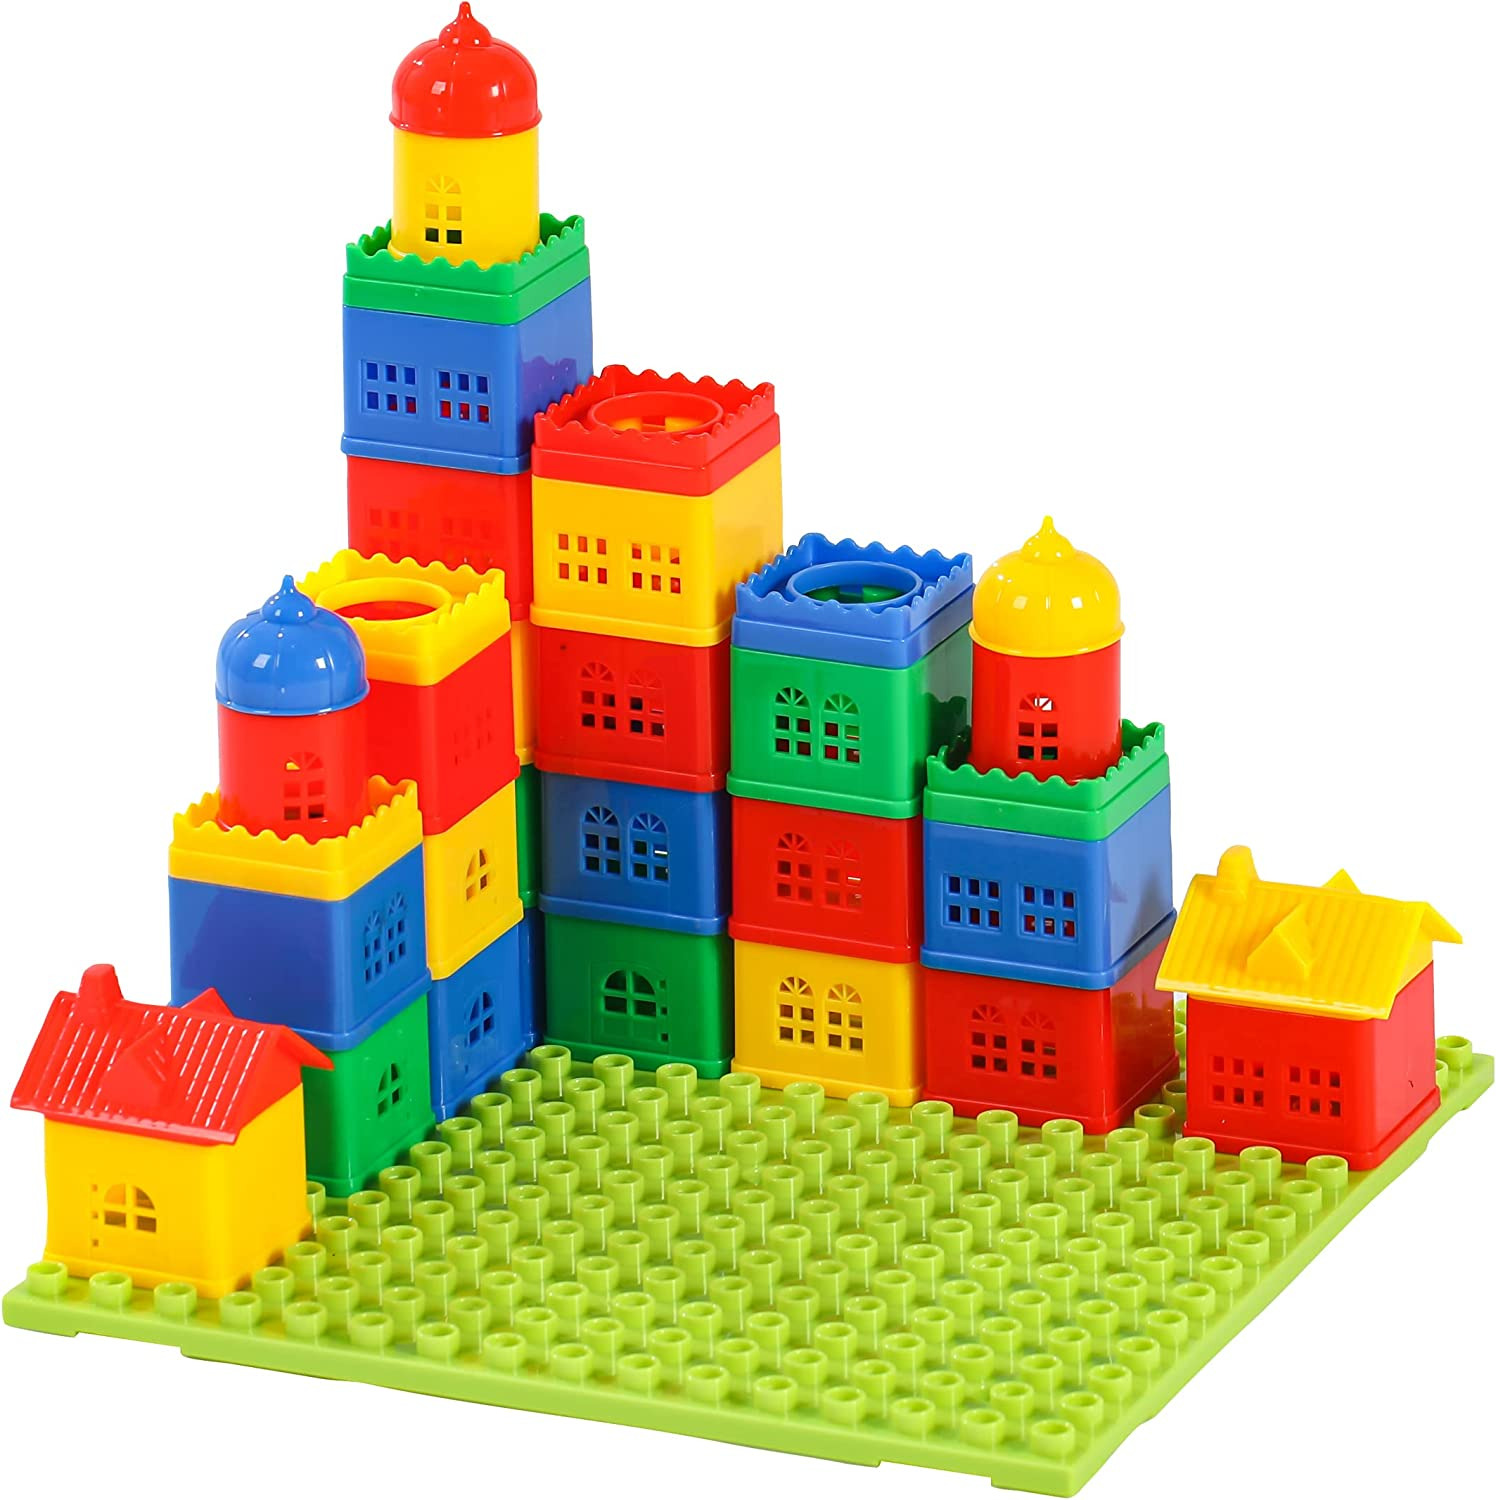 Fun Stackable Blocks for Toddler Play